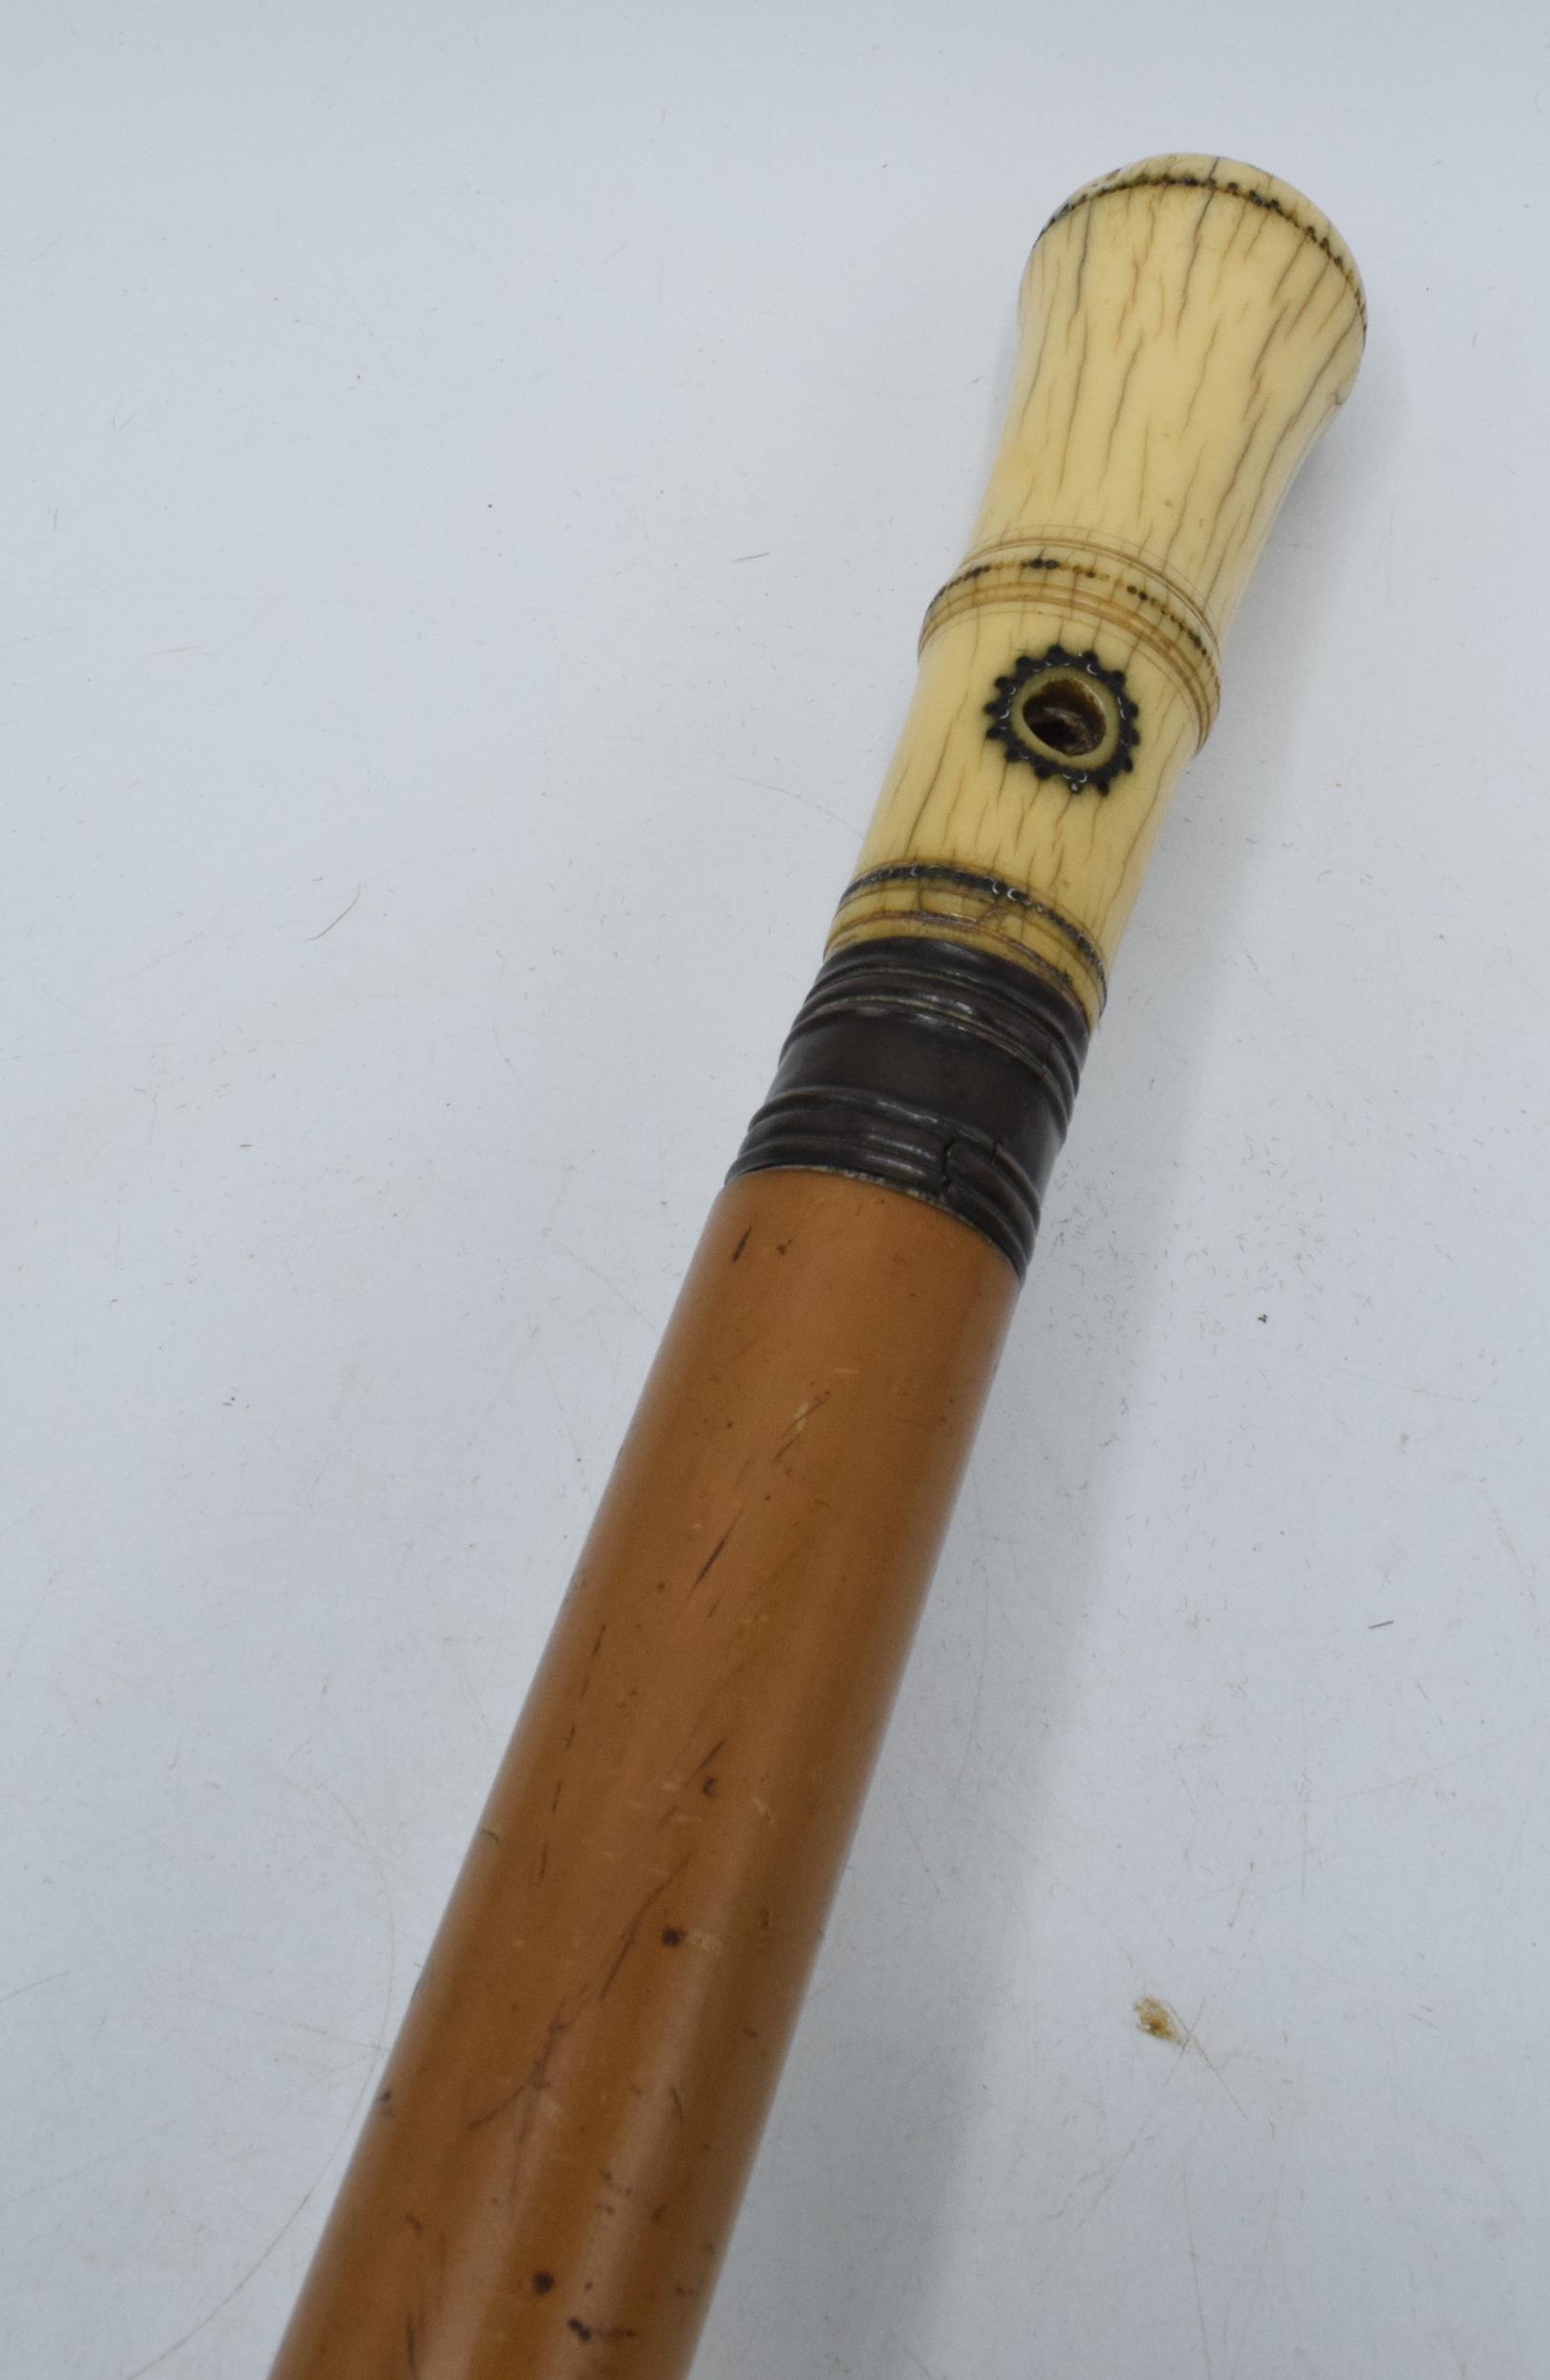 Malaca / malacquer Shafted colonial walking cane 'Raj' period. Bone handle with inlaid decoration. - Image 2 of 6